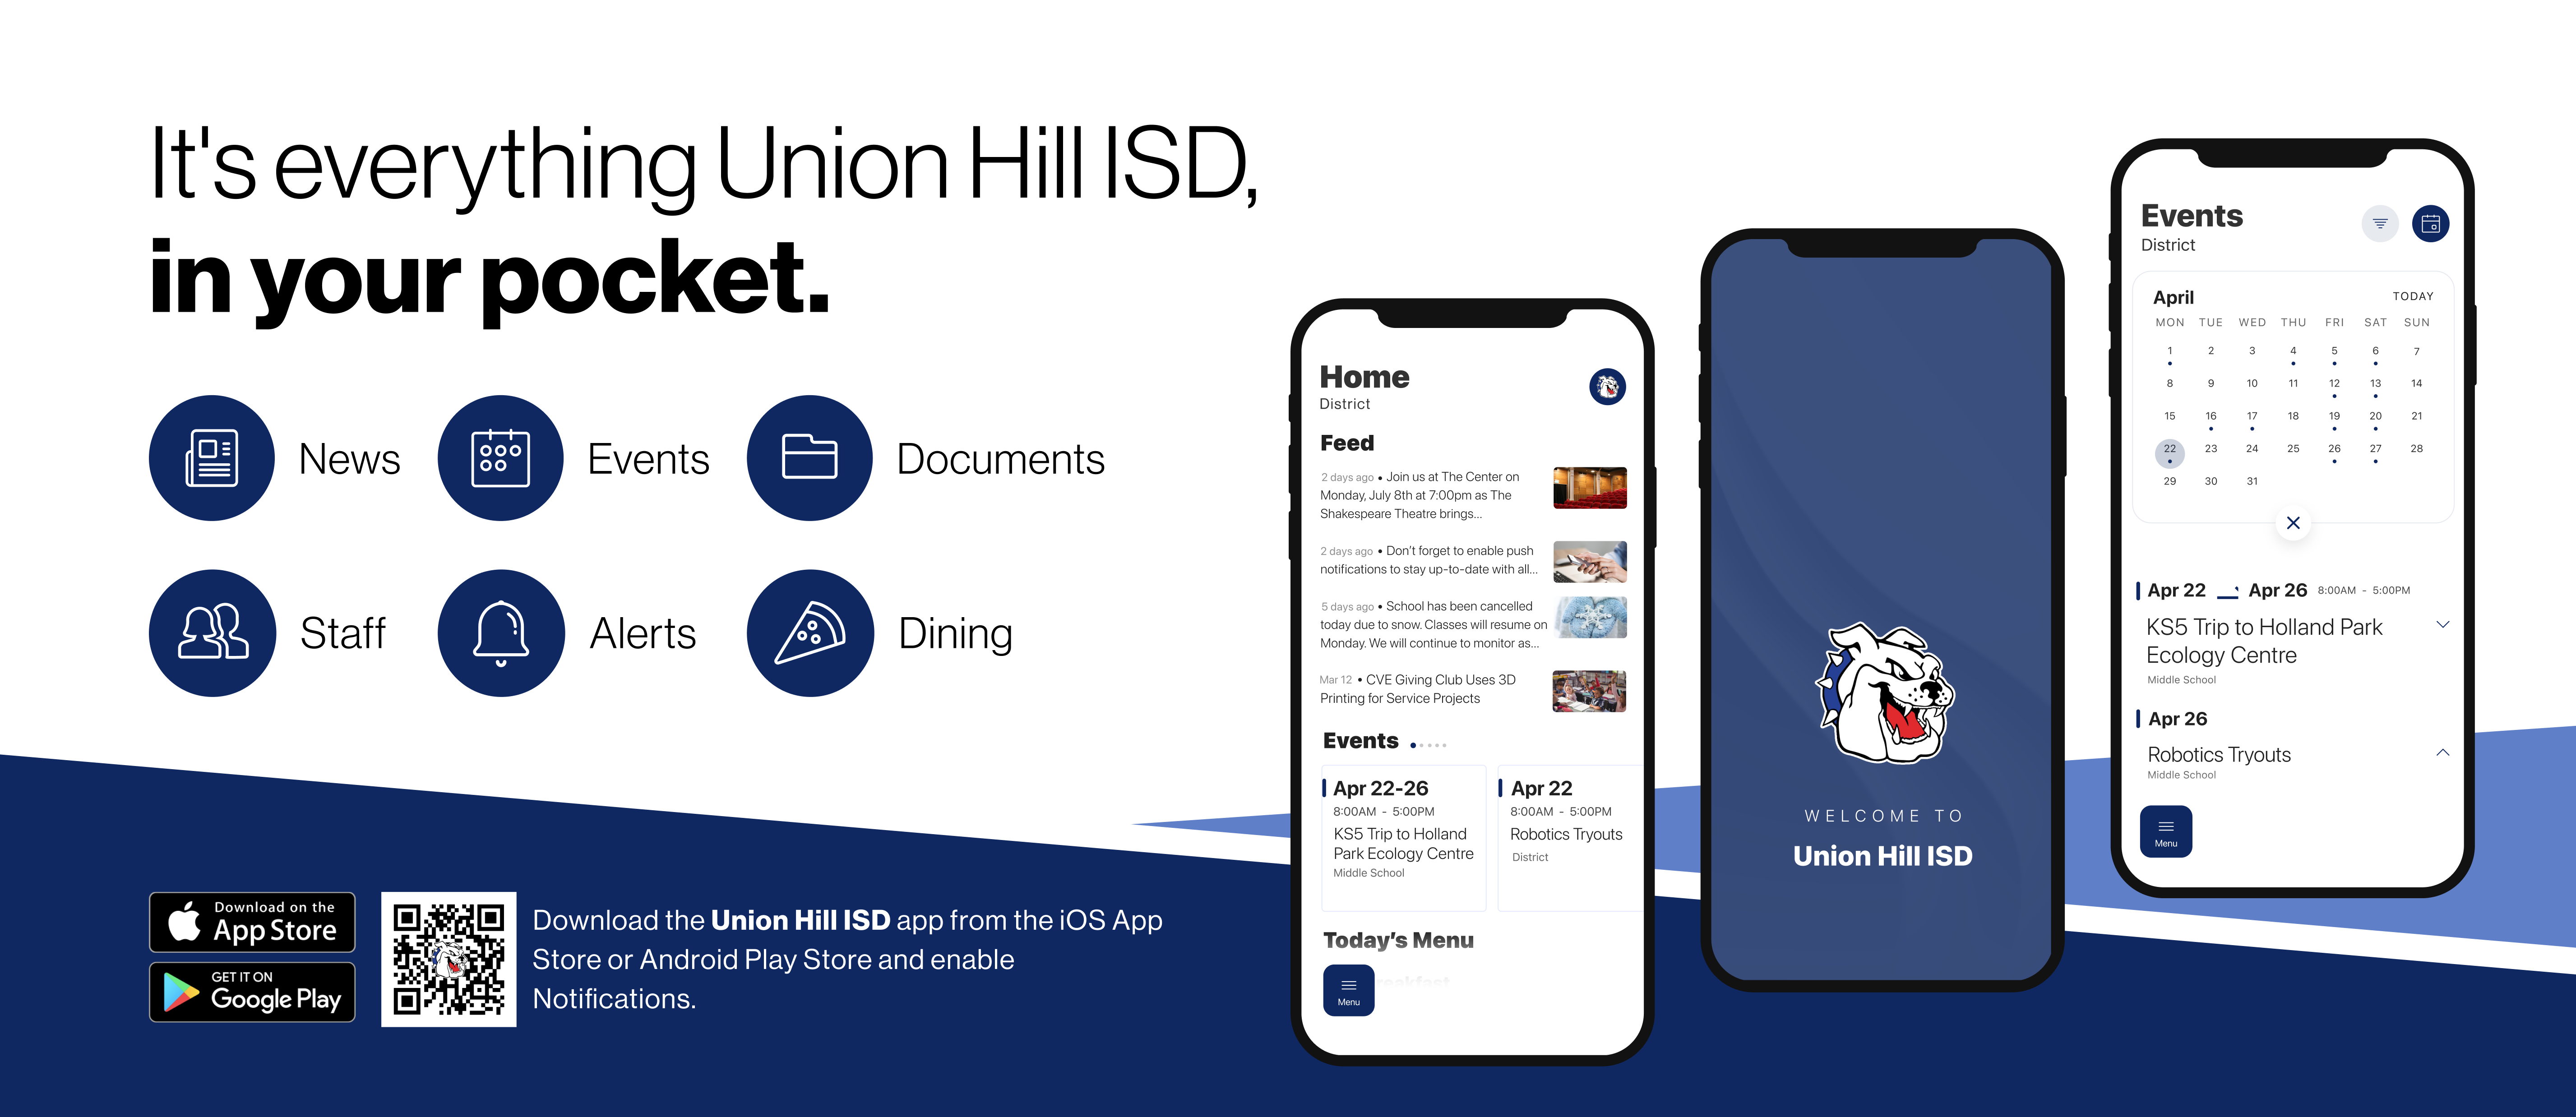 its everything union hill isd, in your pocket, news, events, documents, staff, alerts, dining, Download the Union Hill ISD app from the iOS App Store or Android Play Store